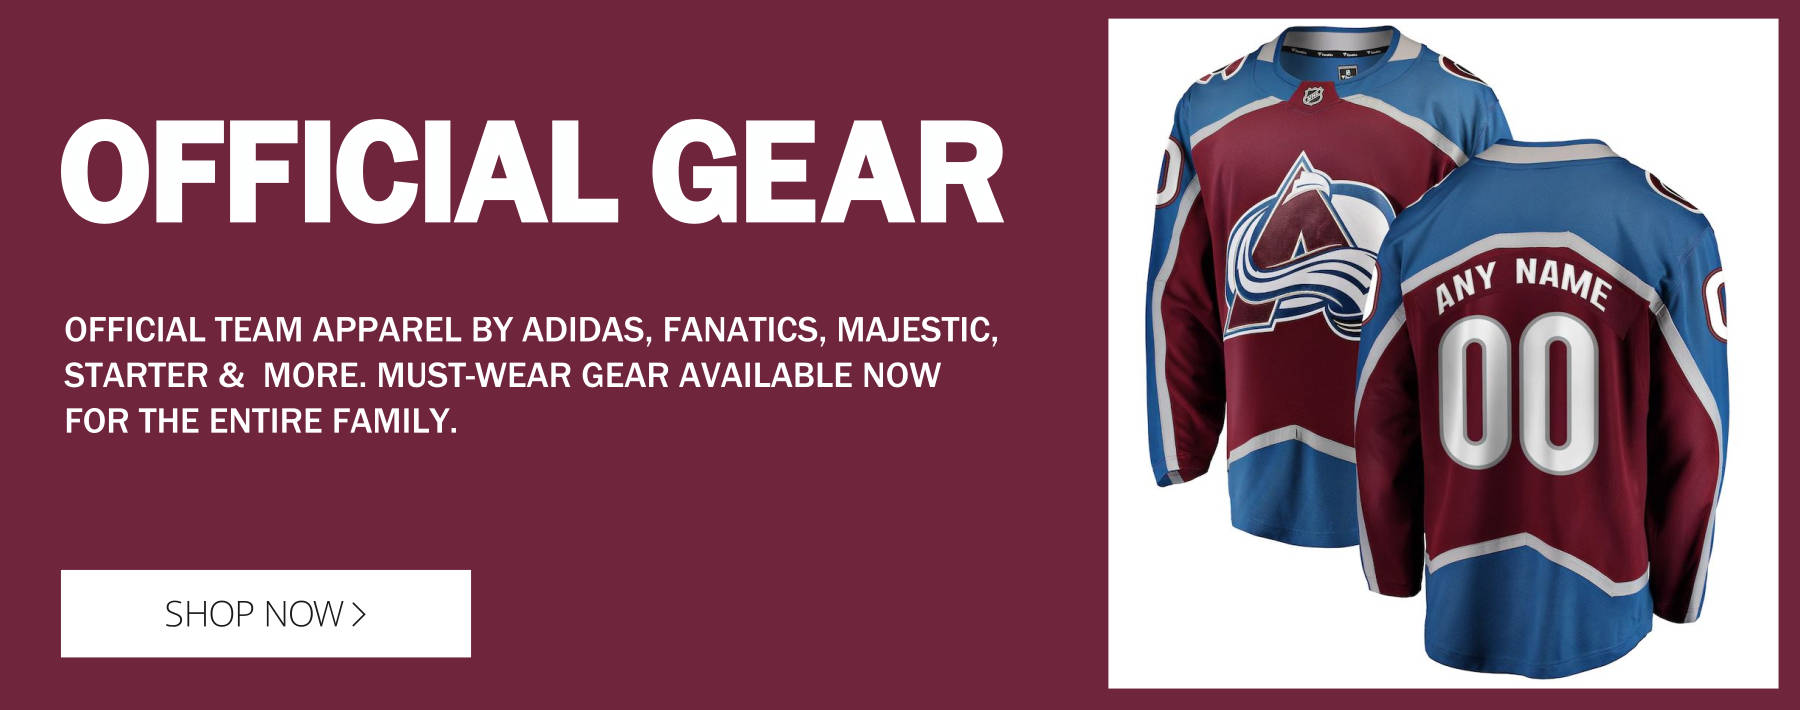 Officially Licensed Colorado Avalanche Gear and Merchandise 